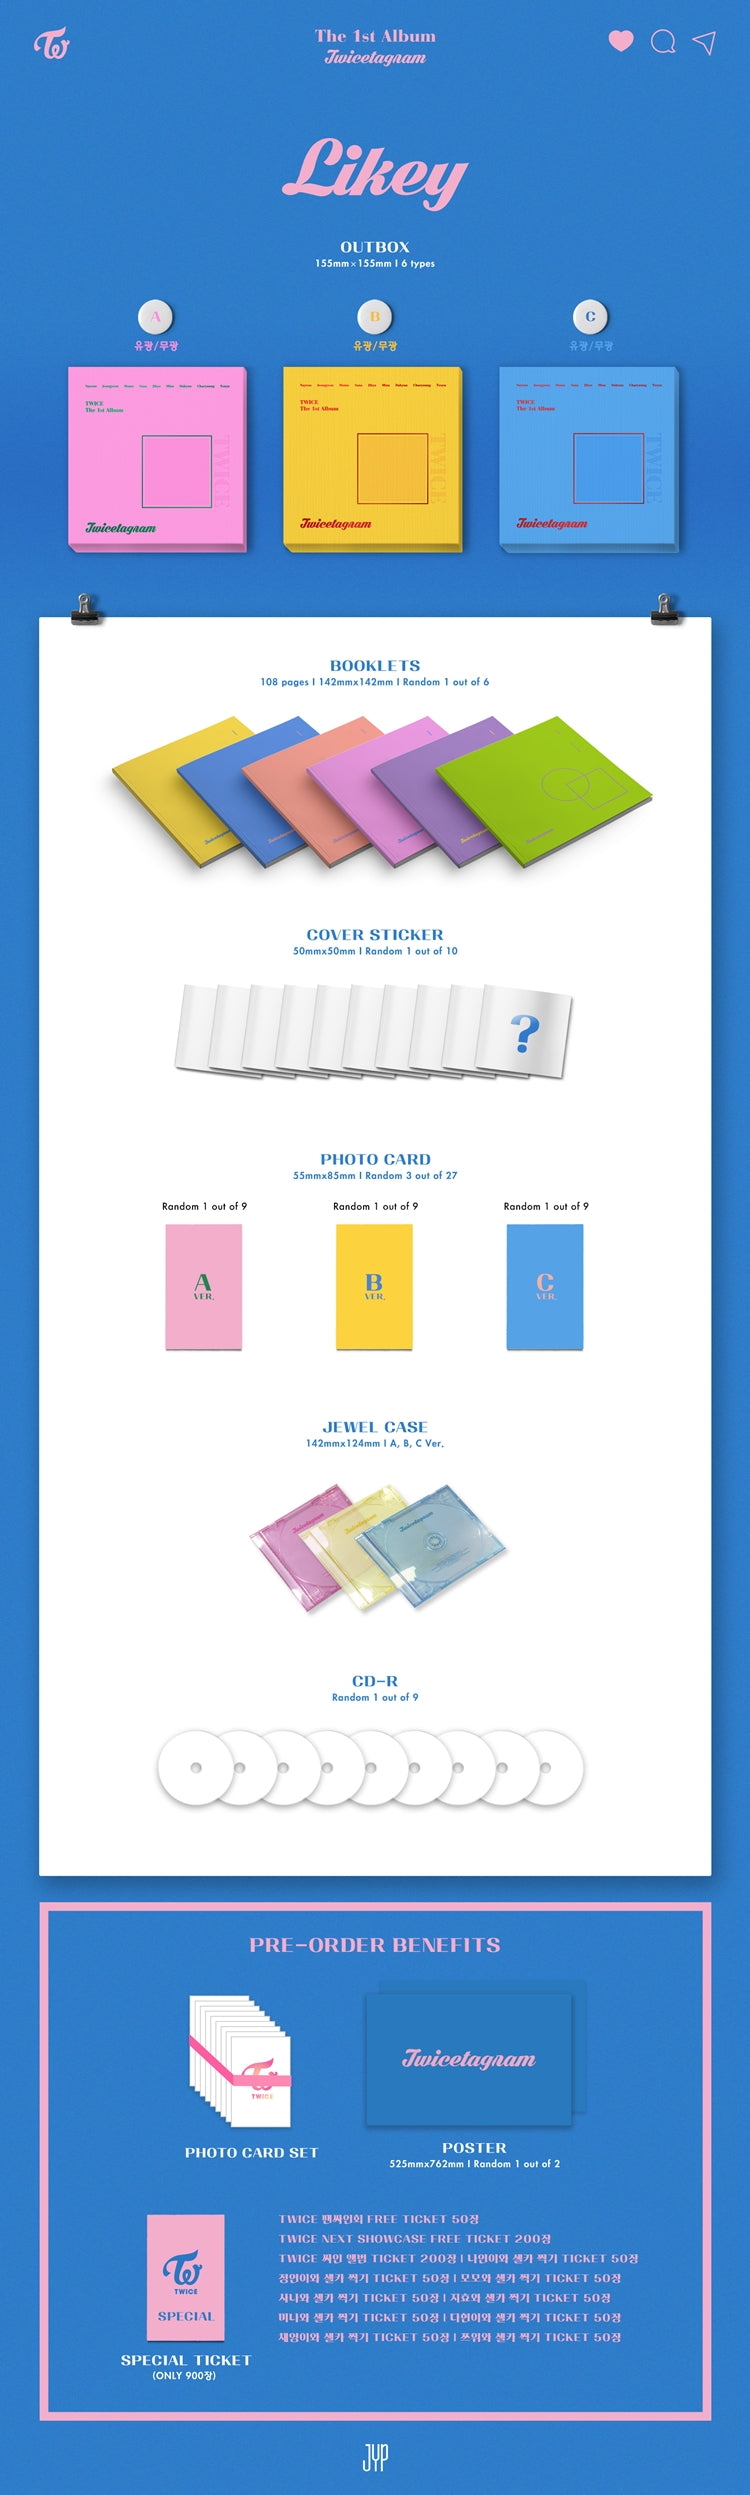 1 CD
1 Booklets (108 pages, random out of 6 types)
1 Cover Sticker (random out of 10 types)
1 Photo Card (random out of 9 ...